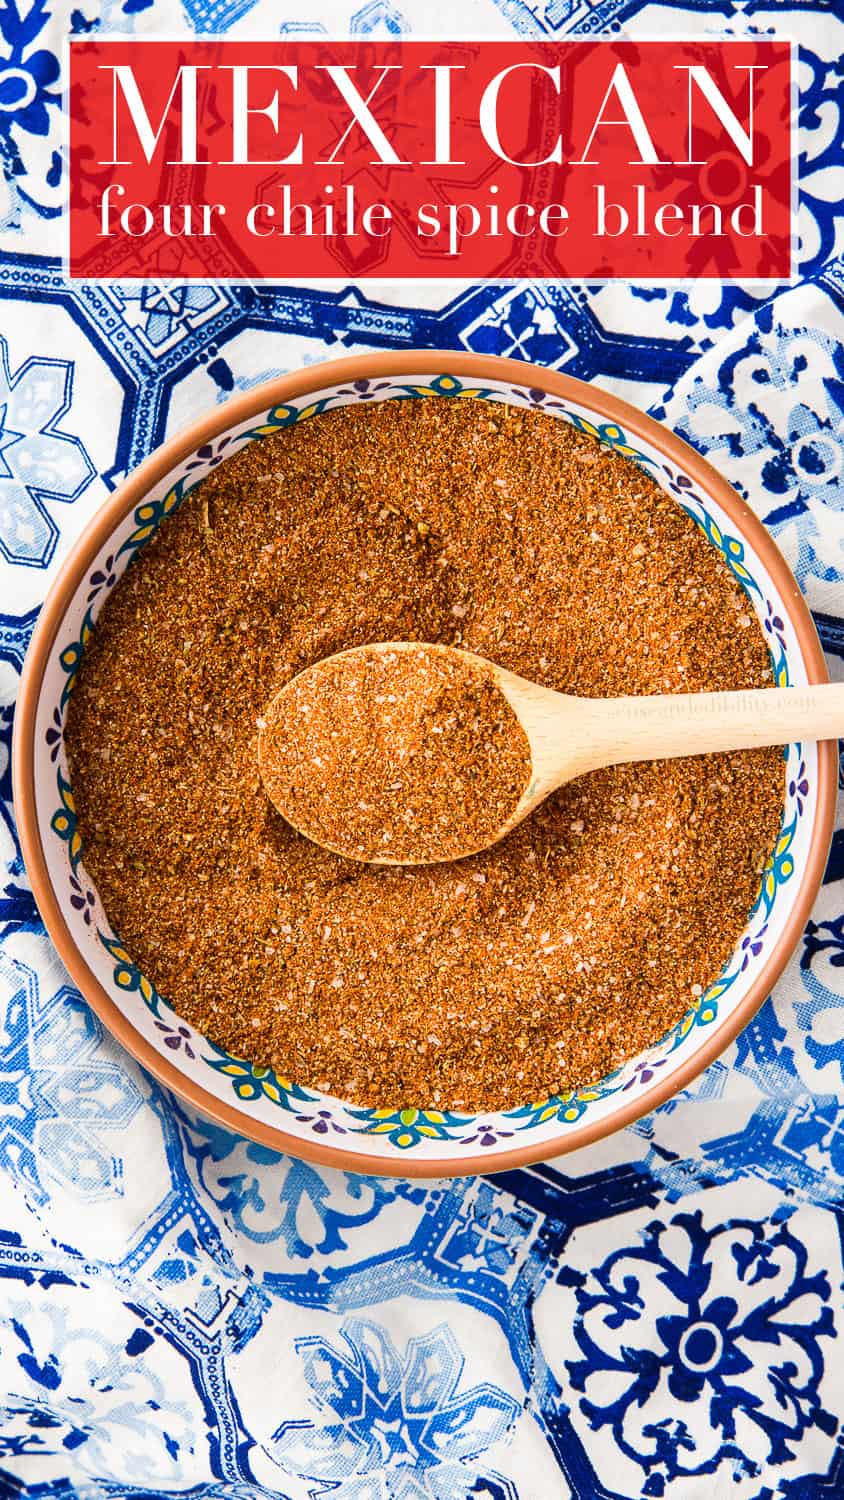 Mexican Four Chile Spice Blend contains all of the flavor you could ever need in one easy-to-make combination. Use it to add flavor to your taco meats, fajitas, soups, dips, or even as a seasoning for your cocktails. This spice blend contains four different chiles to make your spice rub the most unique one this side of the border. #spiceblend #seasoningblend #spicerub #Mexicanspice #tacoseasoning #fajitaseasoning #spices #chilespice #homemadespicerub #homemadespiceblend #Mexicanfood #chilepowder #chilipowder via @ediblesense